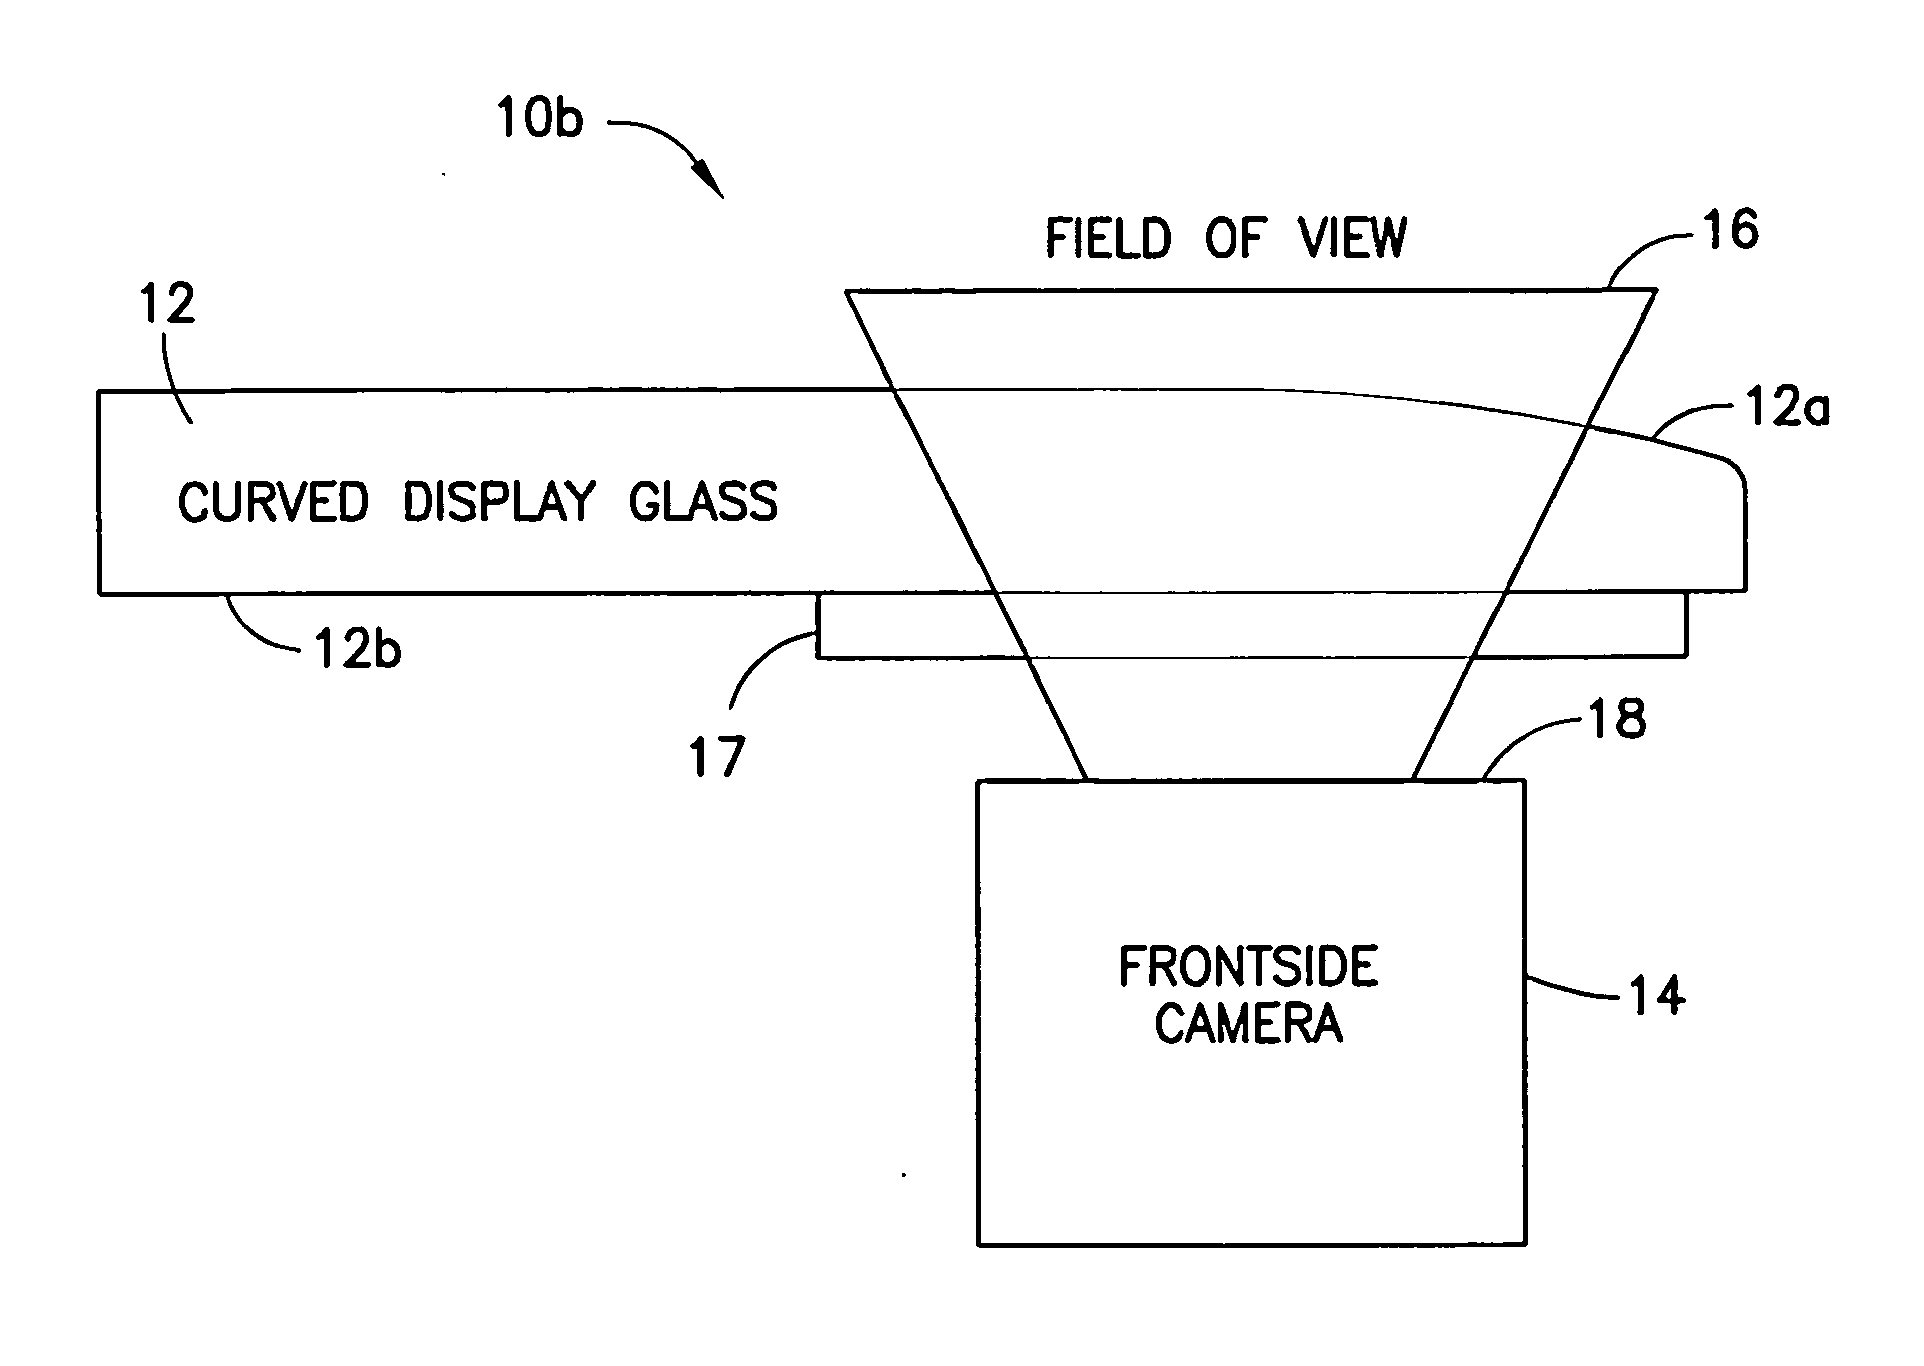 Compensation Of Optical Aberrations Caused By Non-Planar Windows